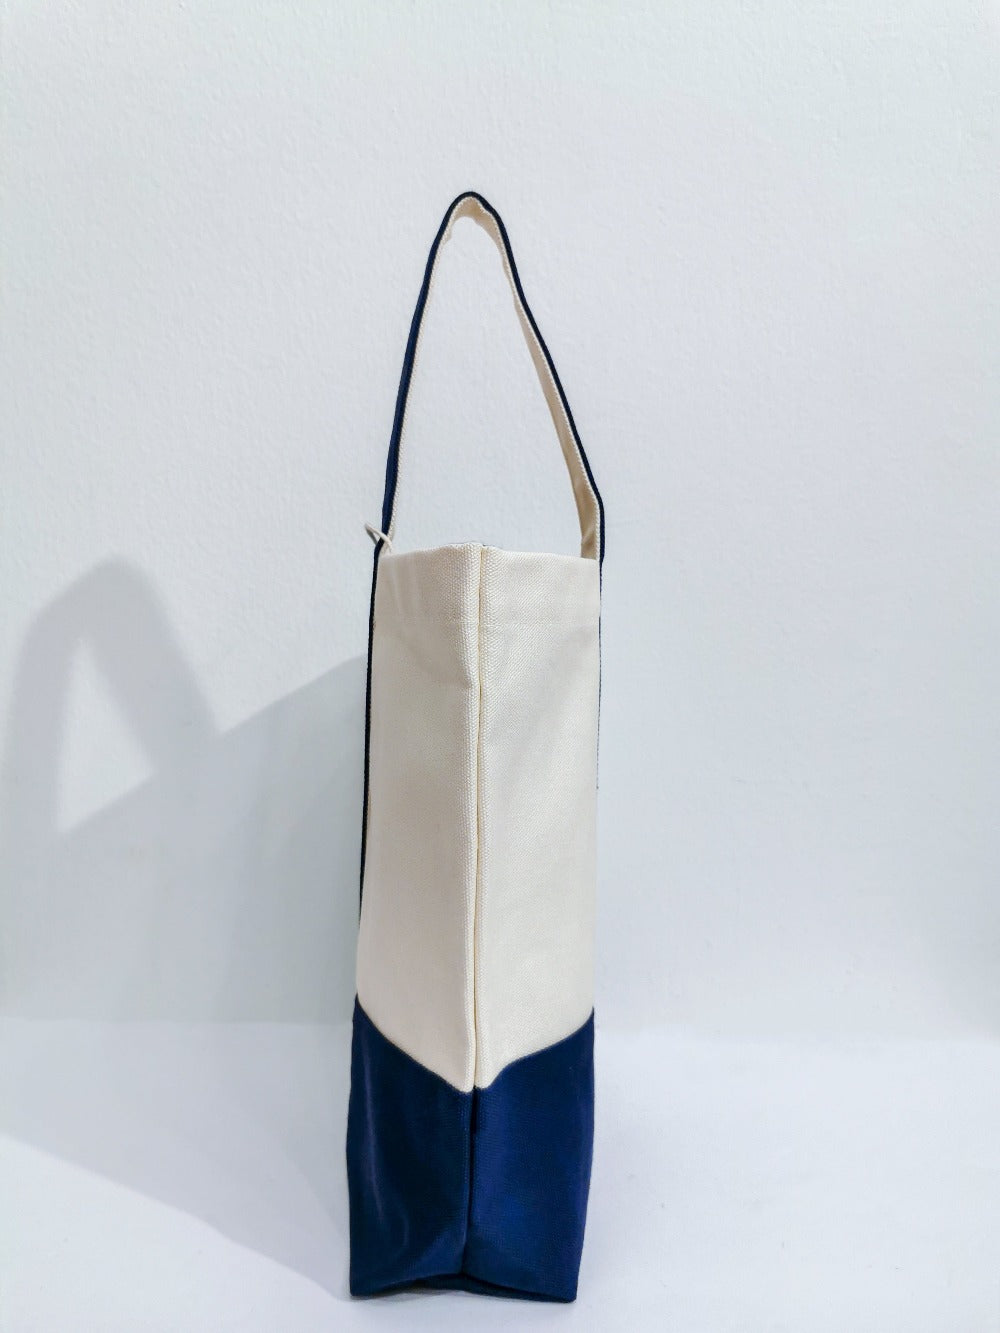 Duo Wine Bag - Gifts by Art Tree